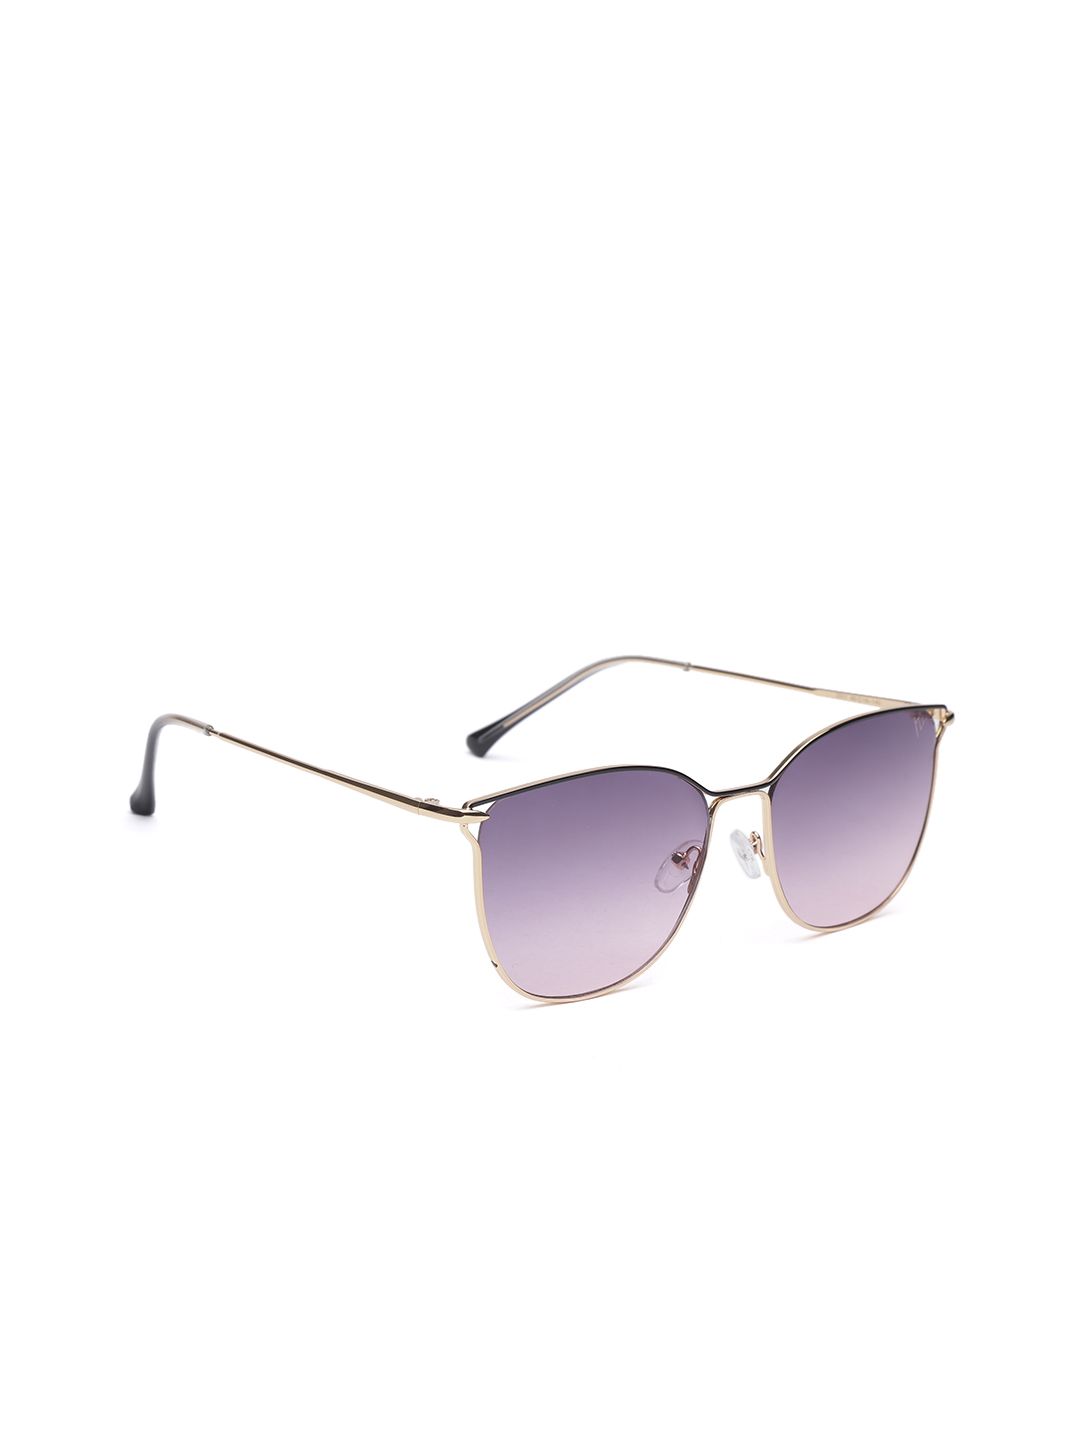 Voyage Unisex Purple Lens & Gold-Toned Square Sunglasses UV Protected Lens 2011MG3240Z Price in India